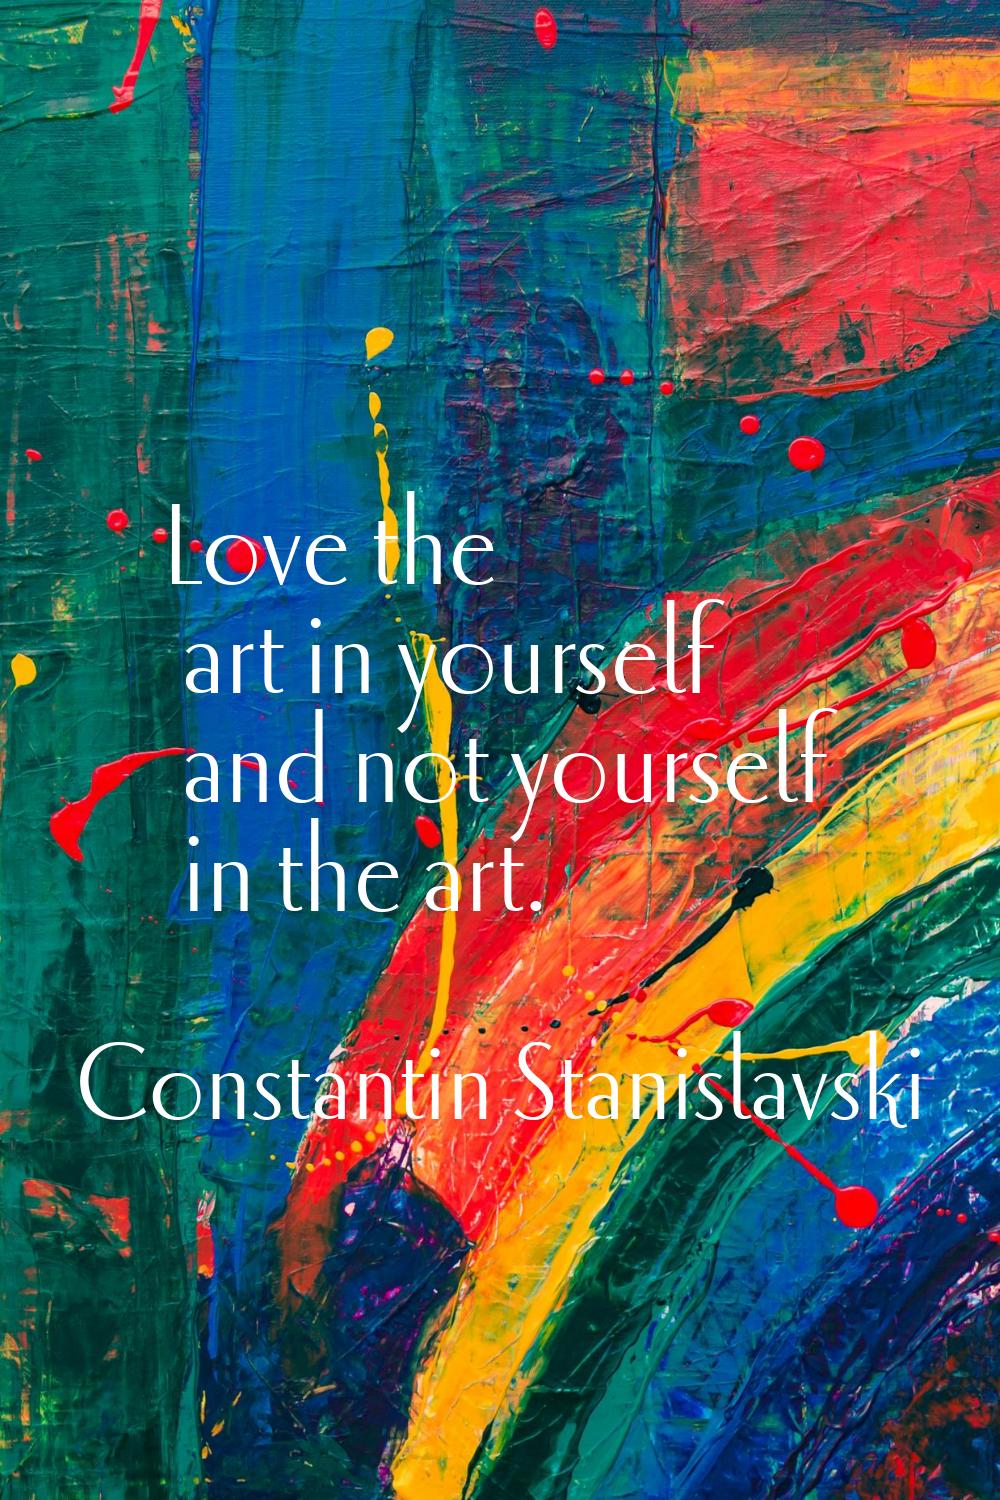 Love the art in yourself and not yourself in the art.